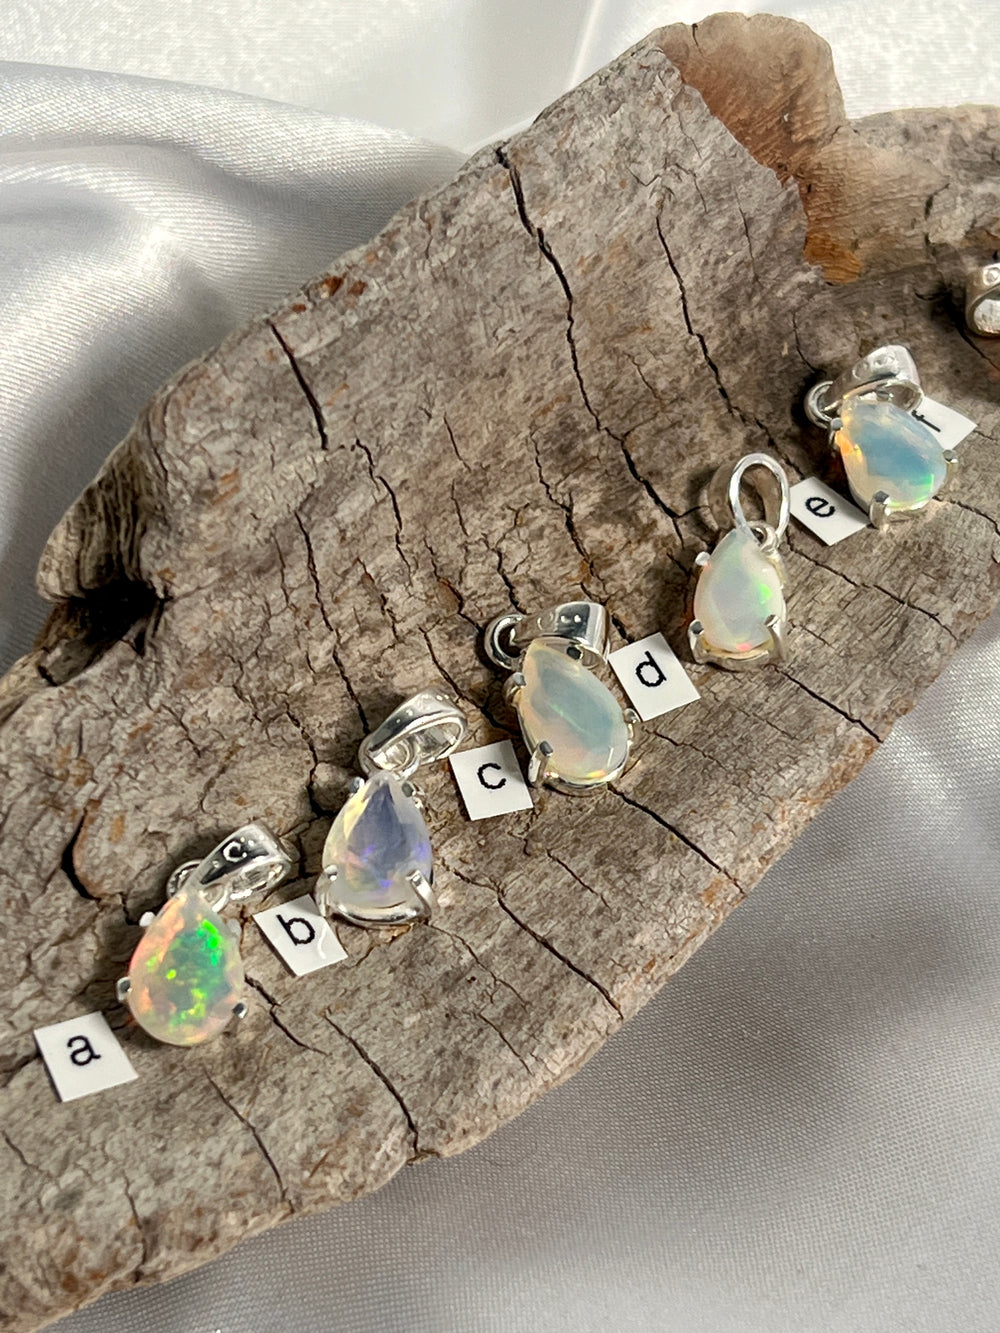 A stunning Dainty Prong Set Facet Cut Teardrop Shaped Ethiopian Opal pendant, delicately crafted with genuine Super Silver settings, suspended on a piece of wood.